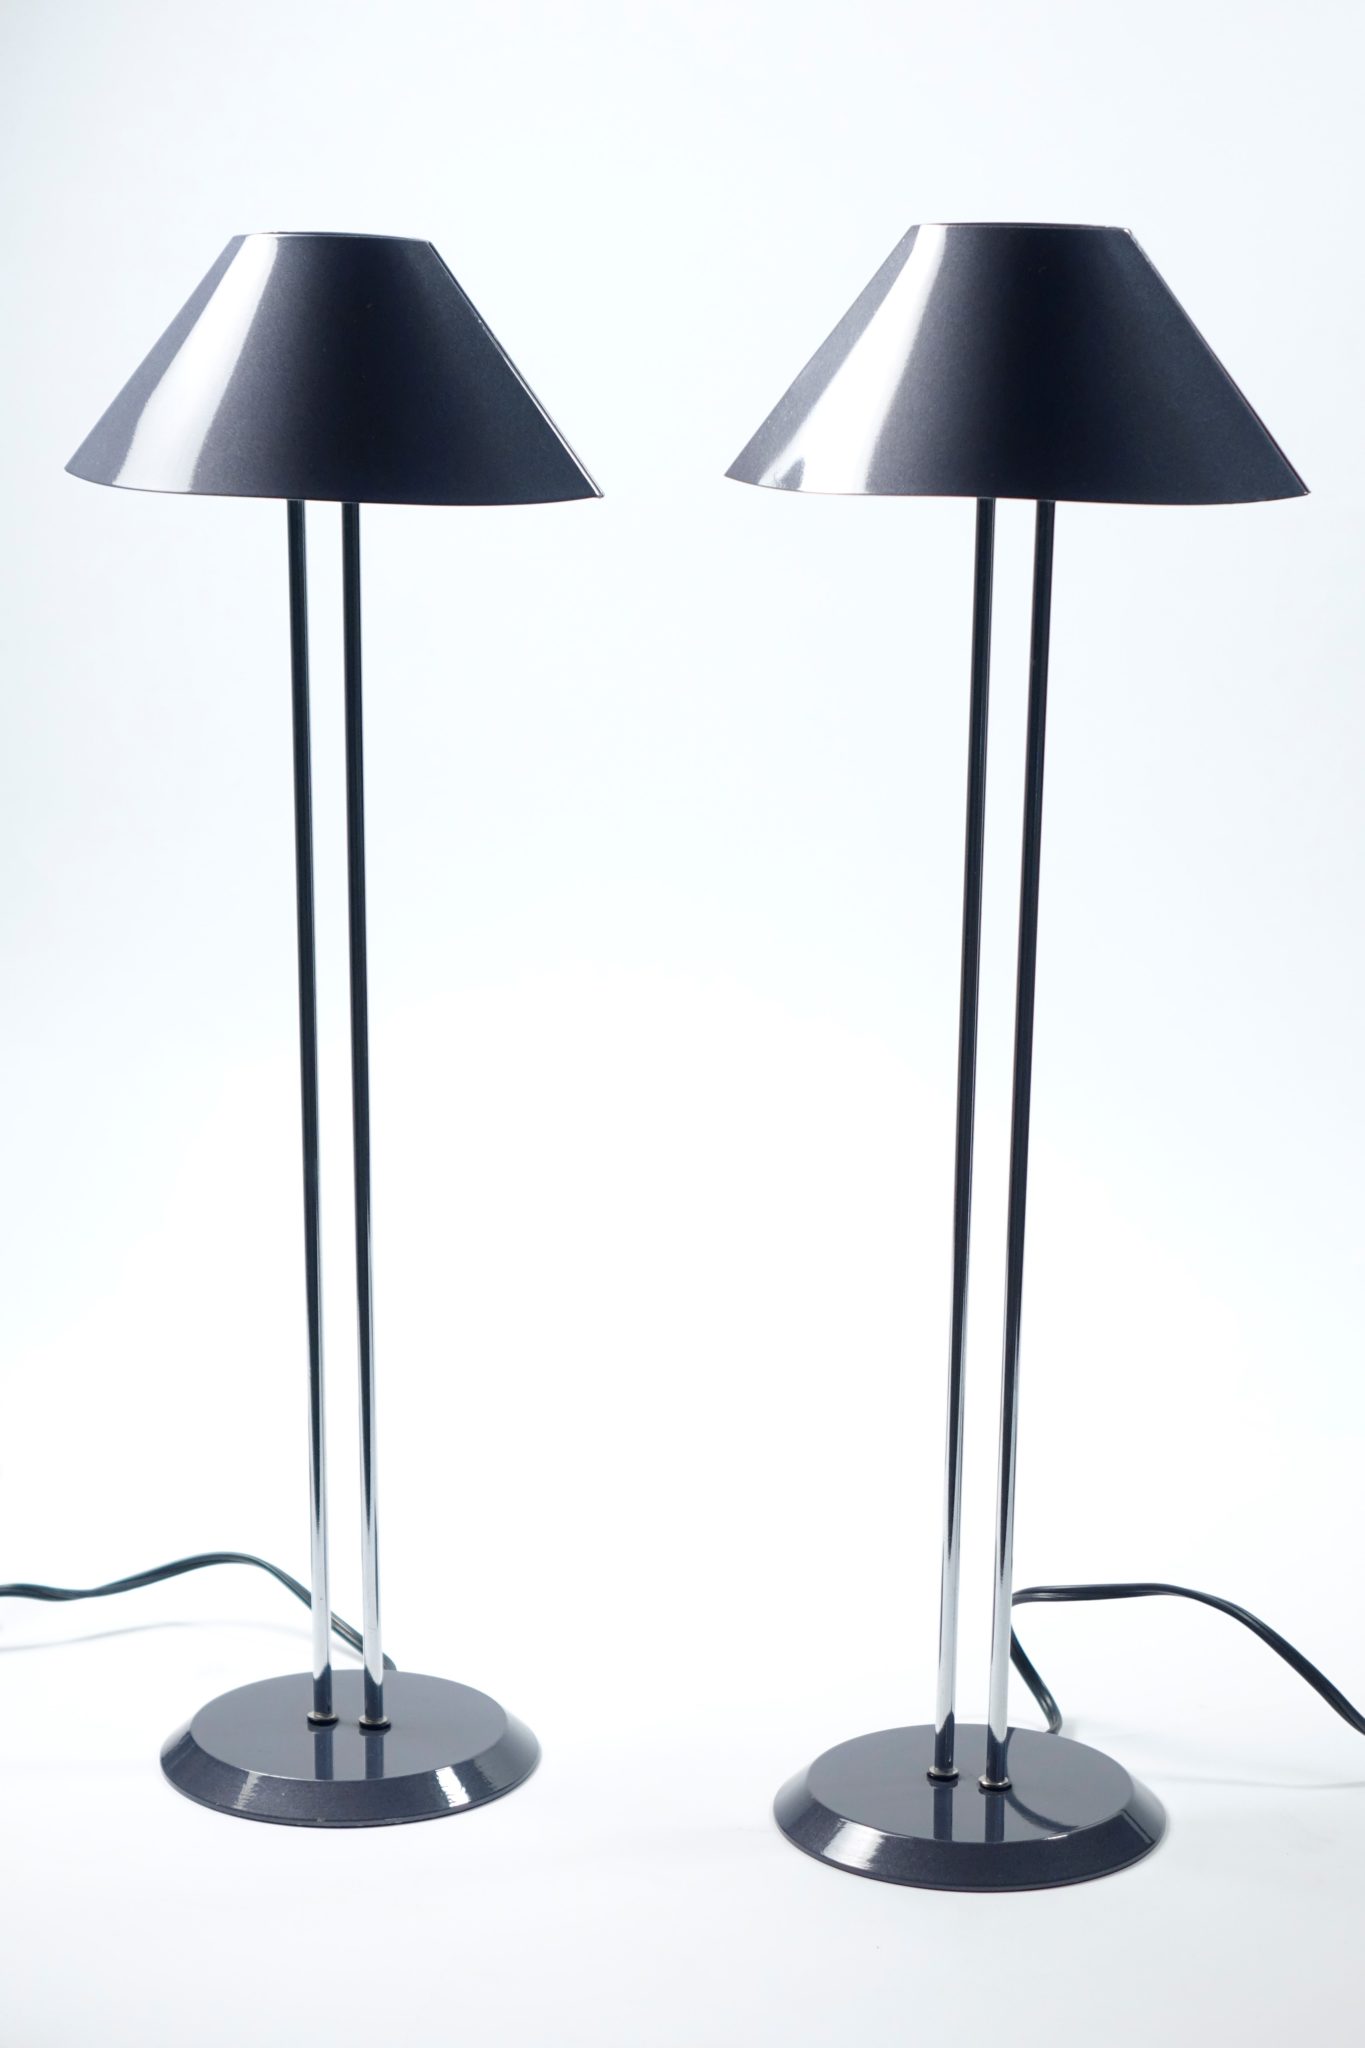 Lighting, Sold - Tall Thin 80's Table Lamps, Halogen - 8317 - Rubbish